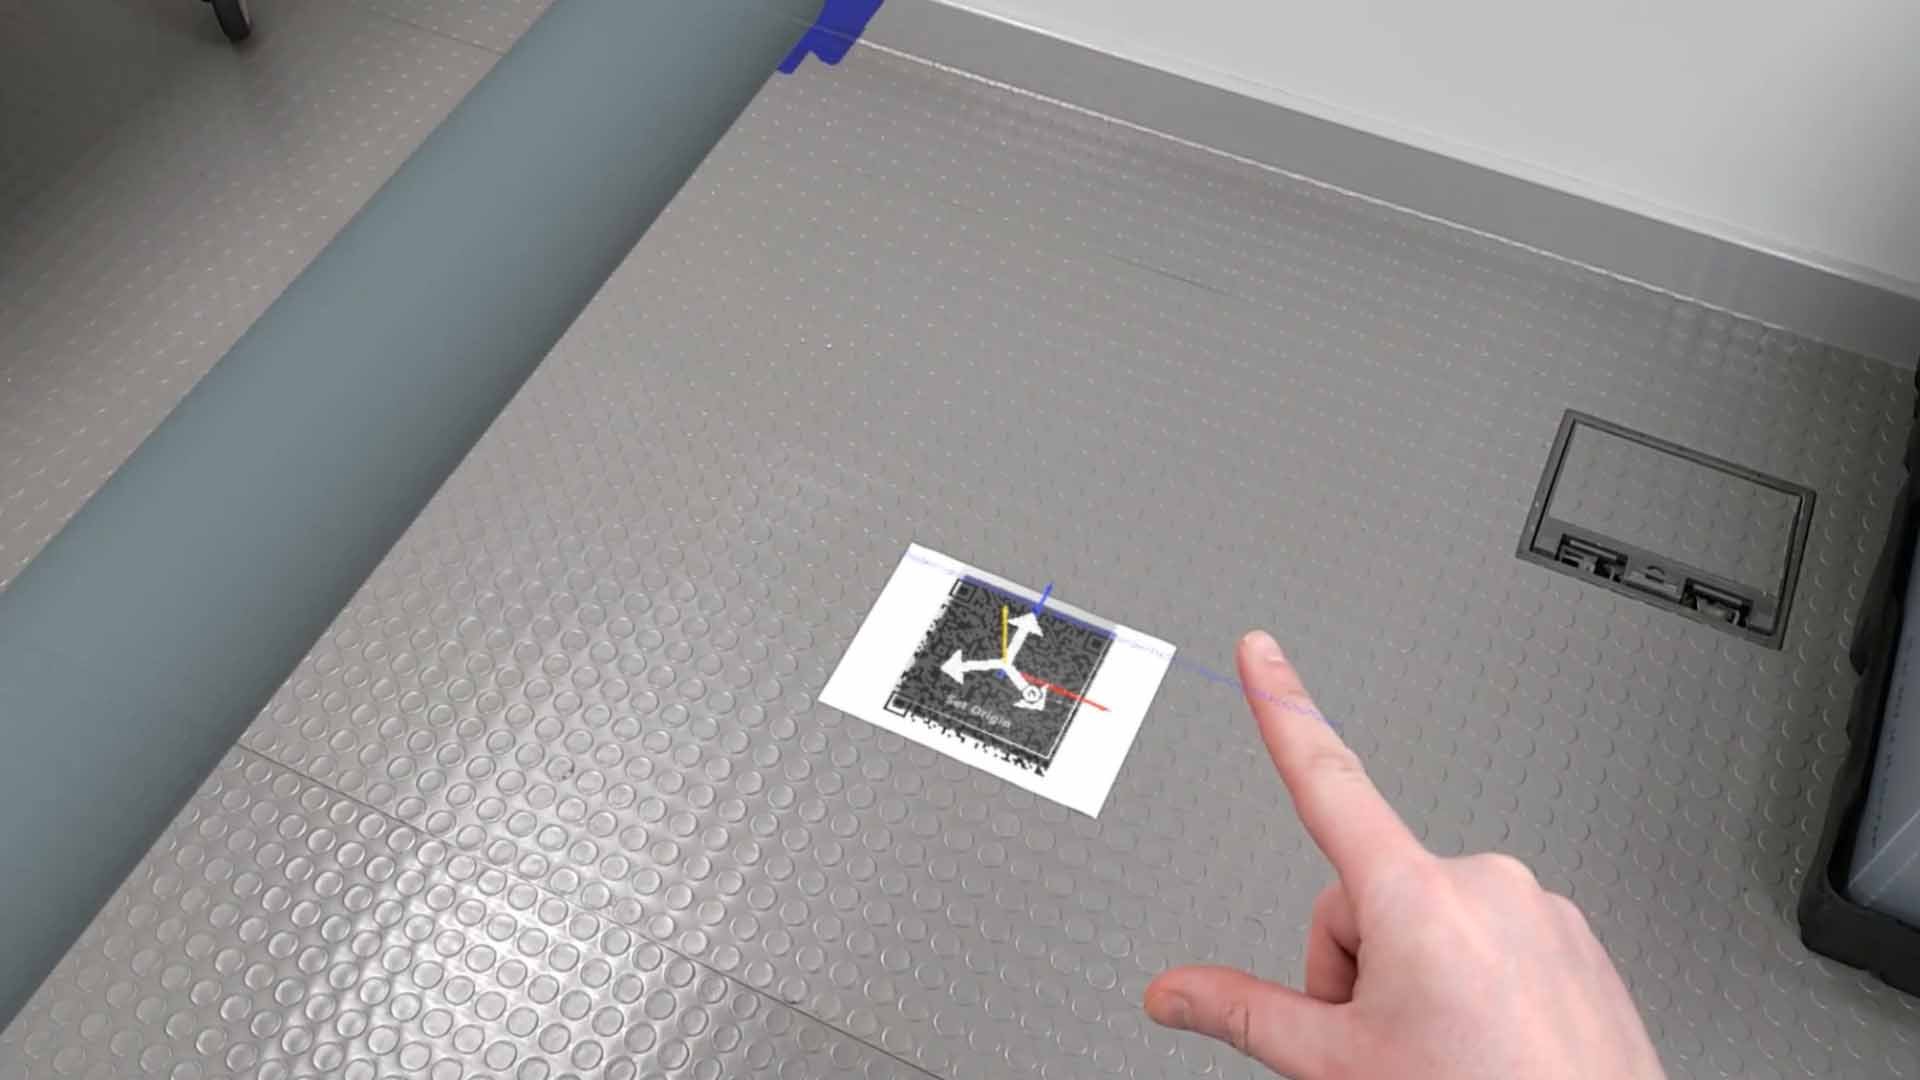 Using QR codes to position 3D data in specific locations using TheoremXR on HoloLens 2 Mixed Reality headset